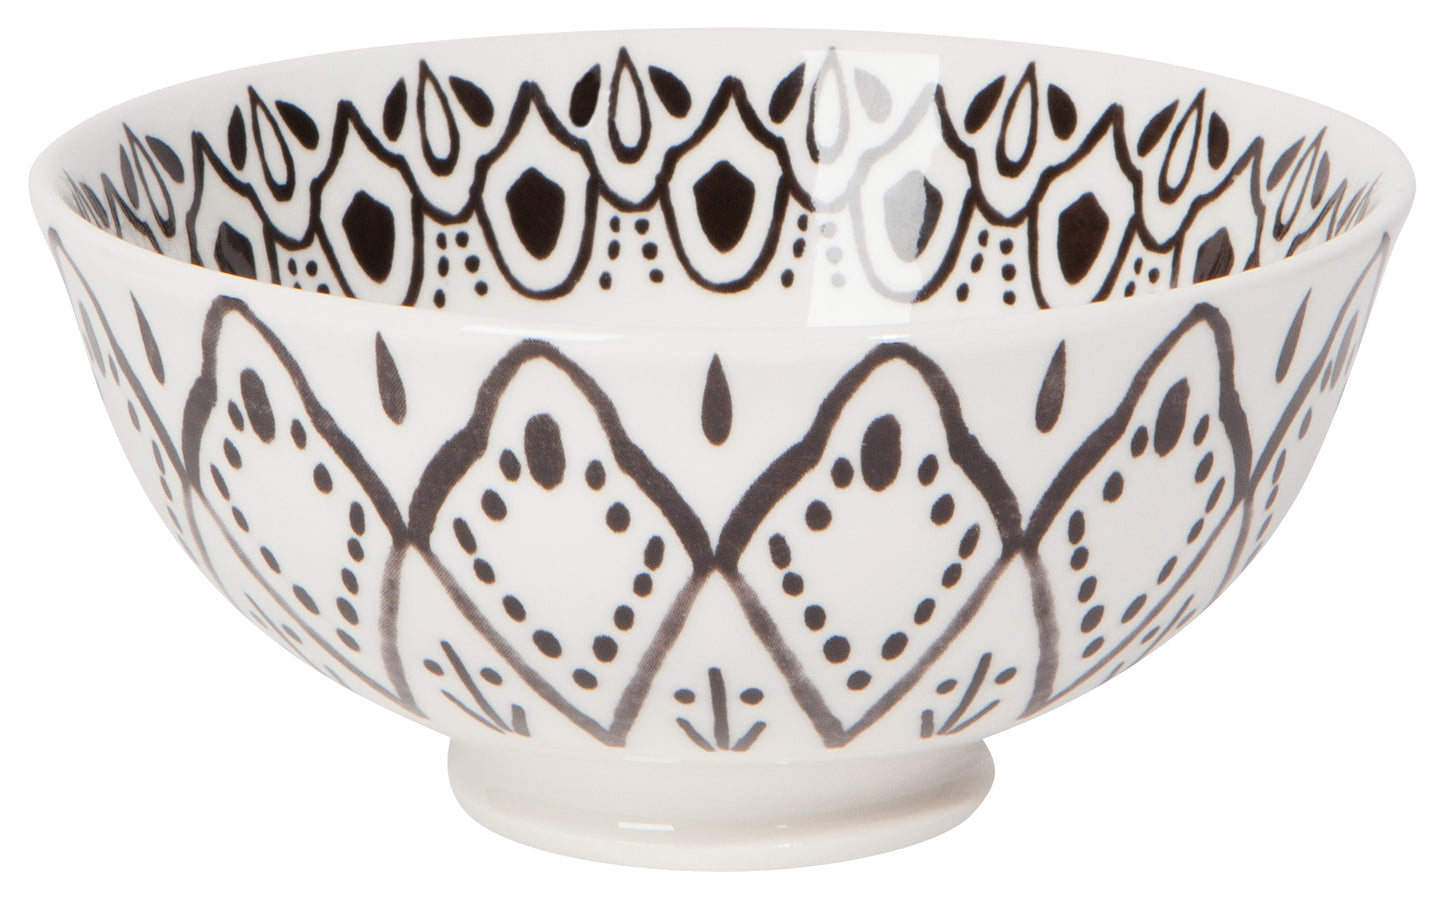 Harmony Stamped Bowl 4.75"